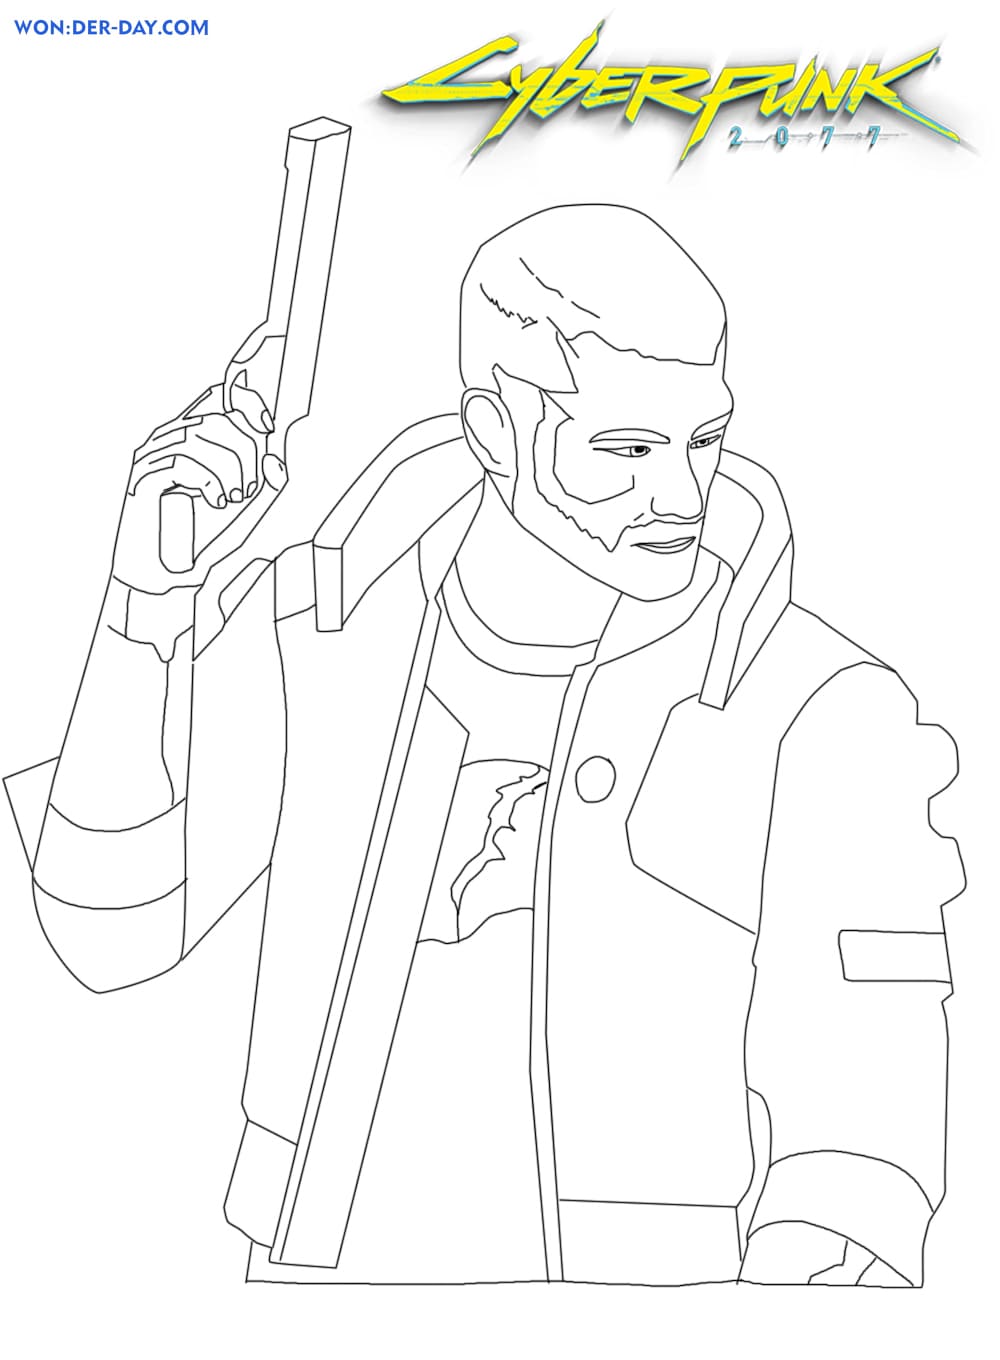 Cyberpunk 2077 Coloring pages. Print for free | WONDER DAY — Coloring pages  for children and adults